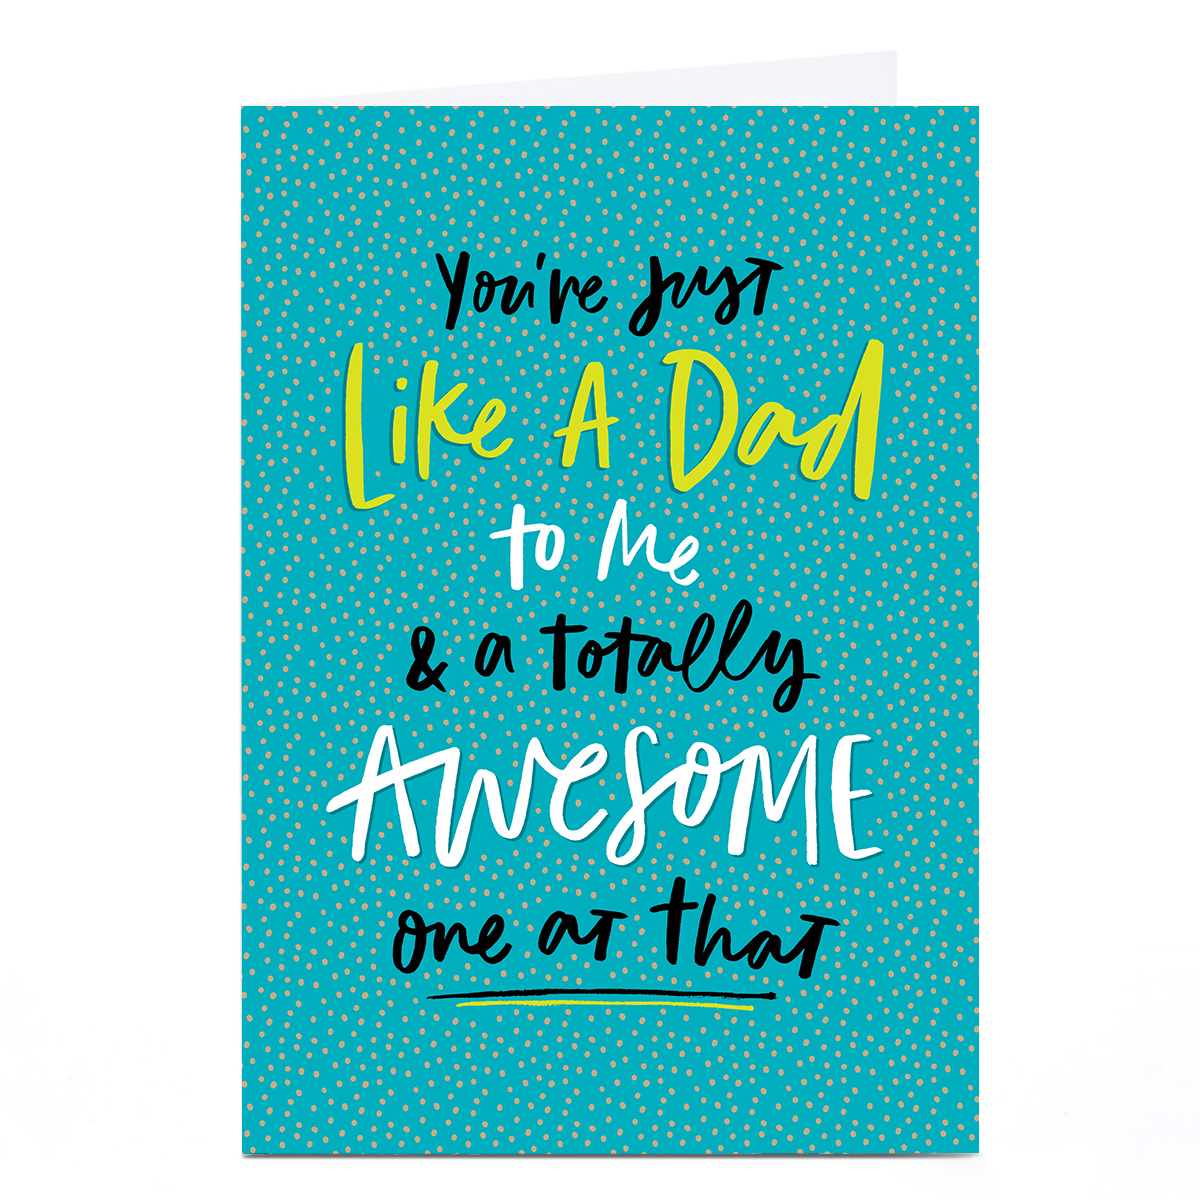 Personalised Father's Day Card - You're Just Like A Dad